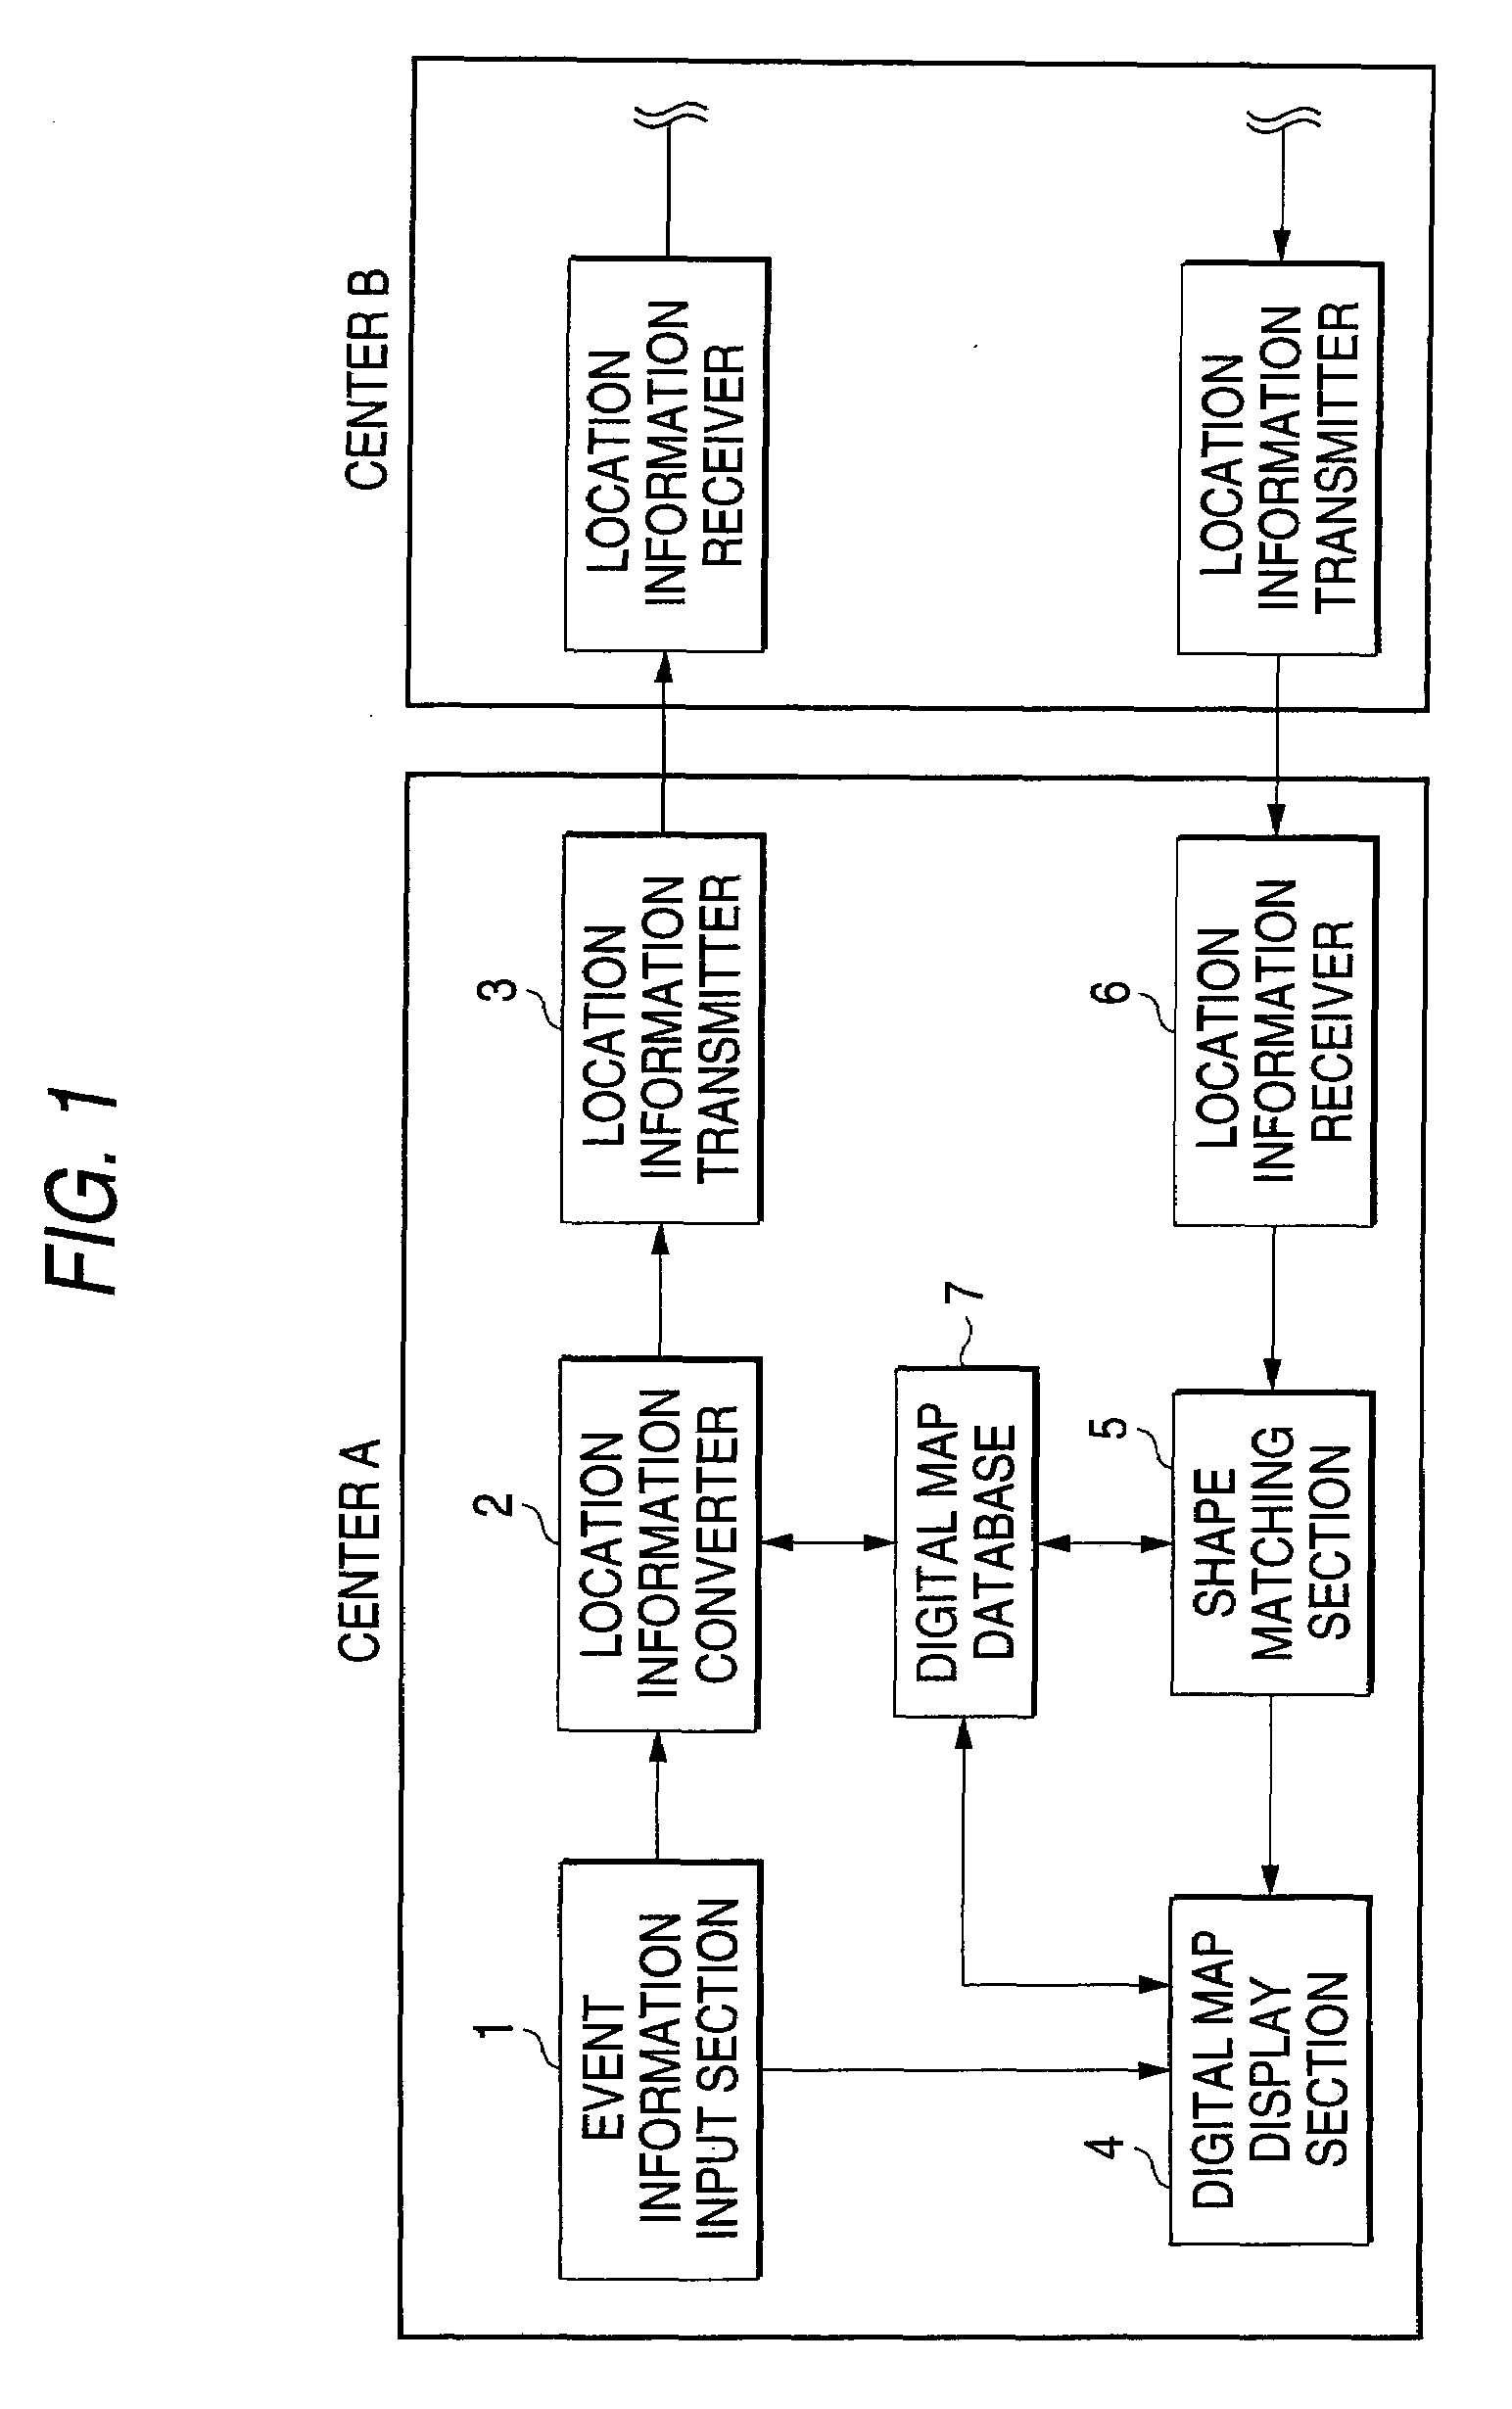 Method for transmitting location information on a digital map, apparatus for implementing the method and traffic information provision/reception system